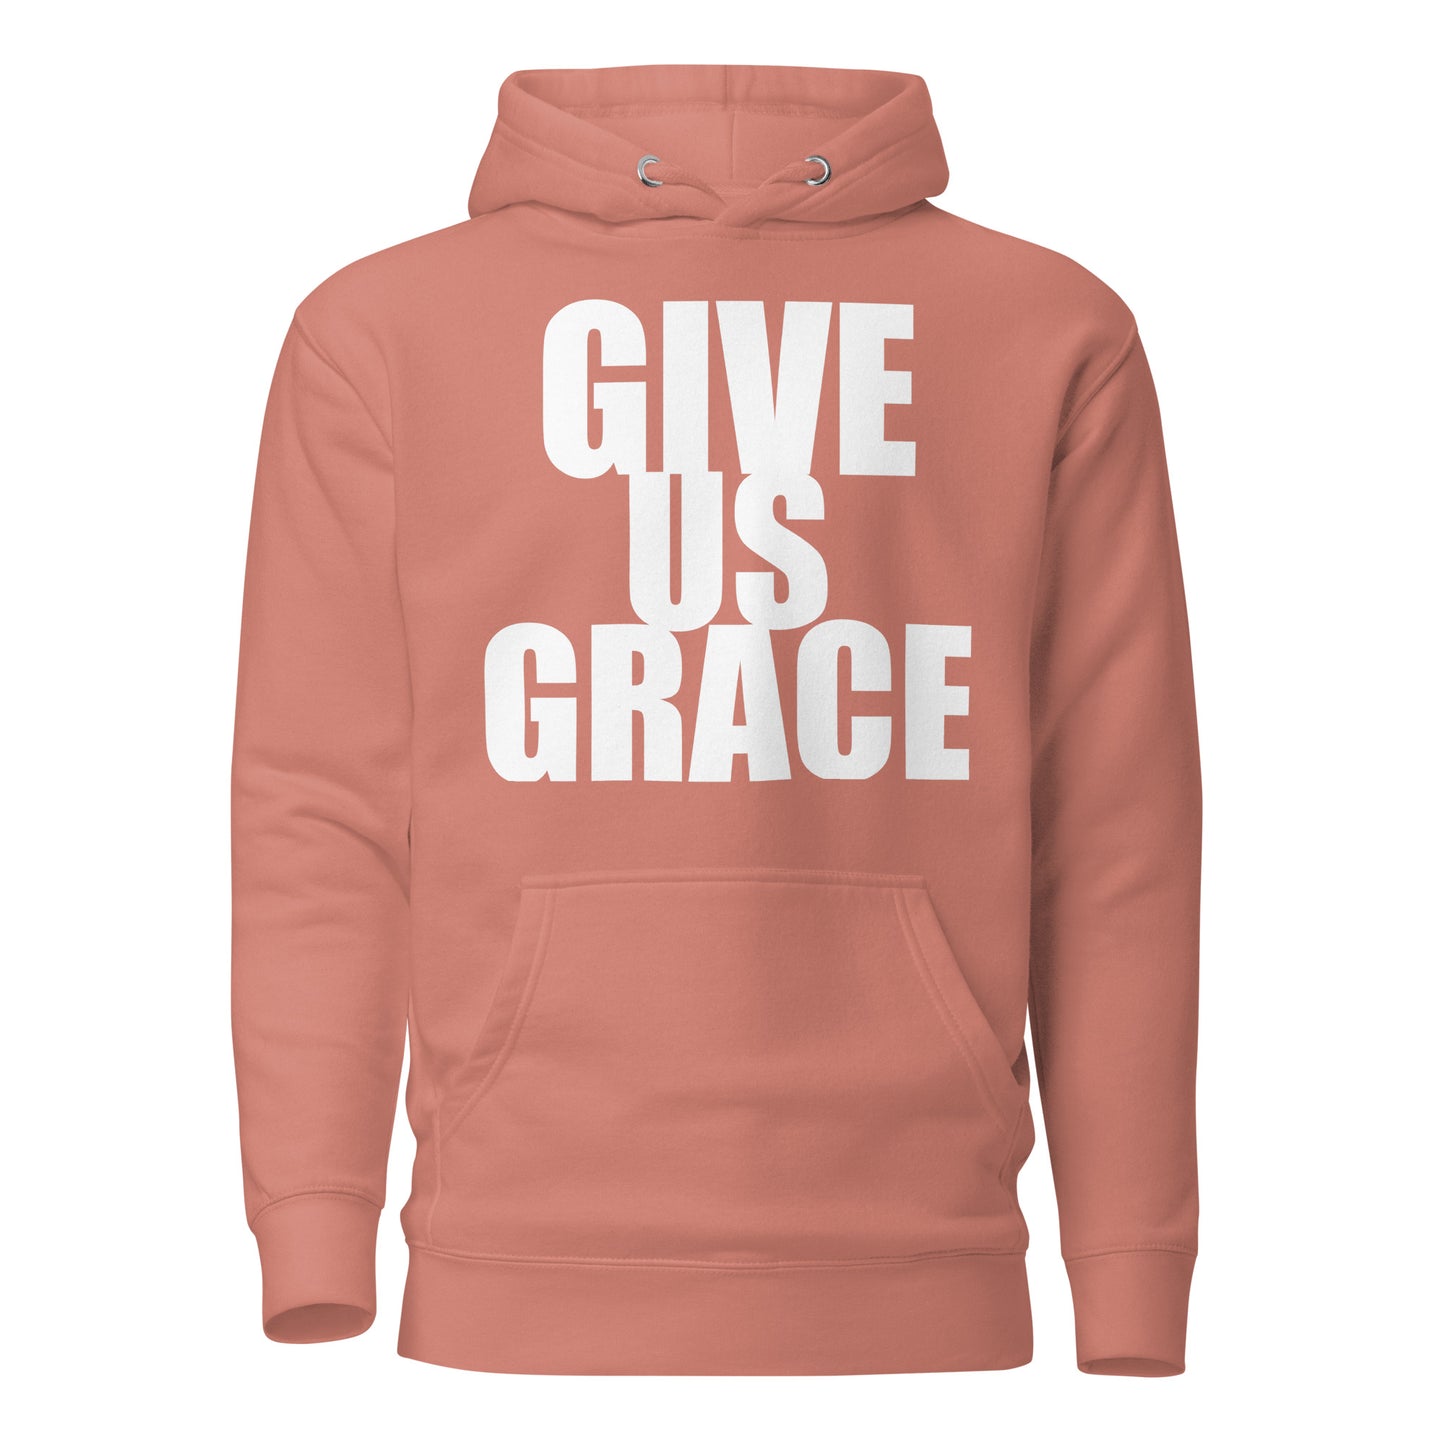 GIVE US GRACE Graphic Hoodie - AUNTi HERO